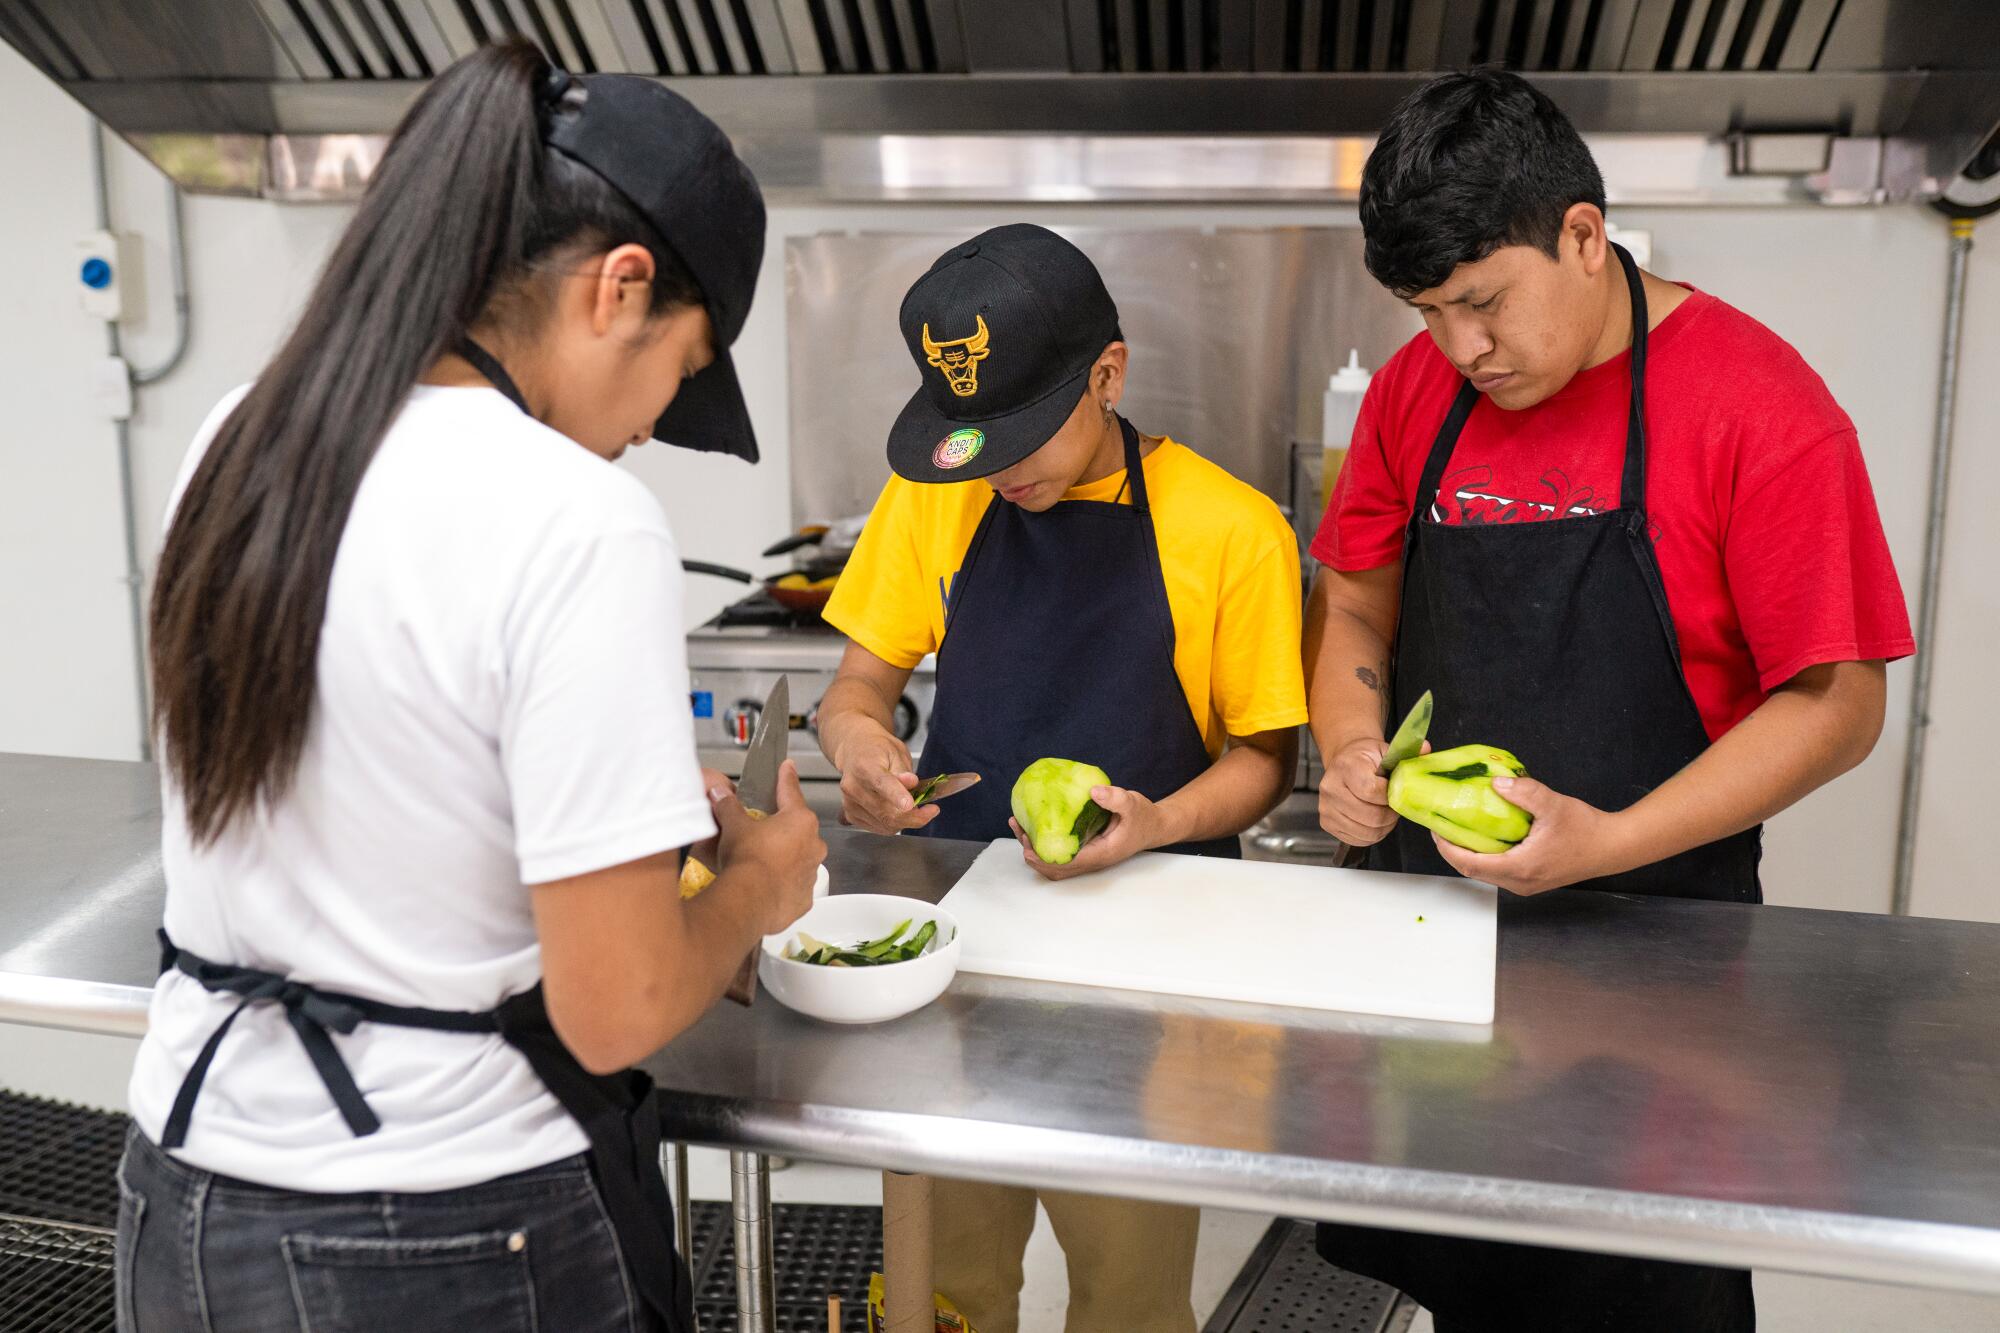 Three young cooking students peel a green squash standing at a metal table.